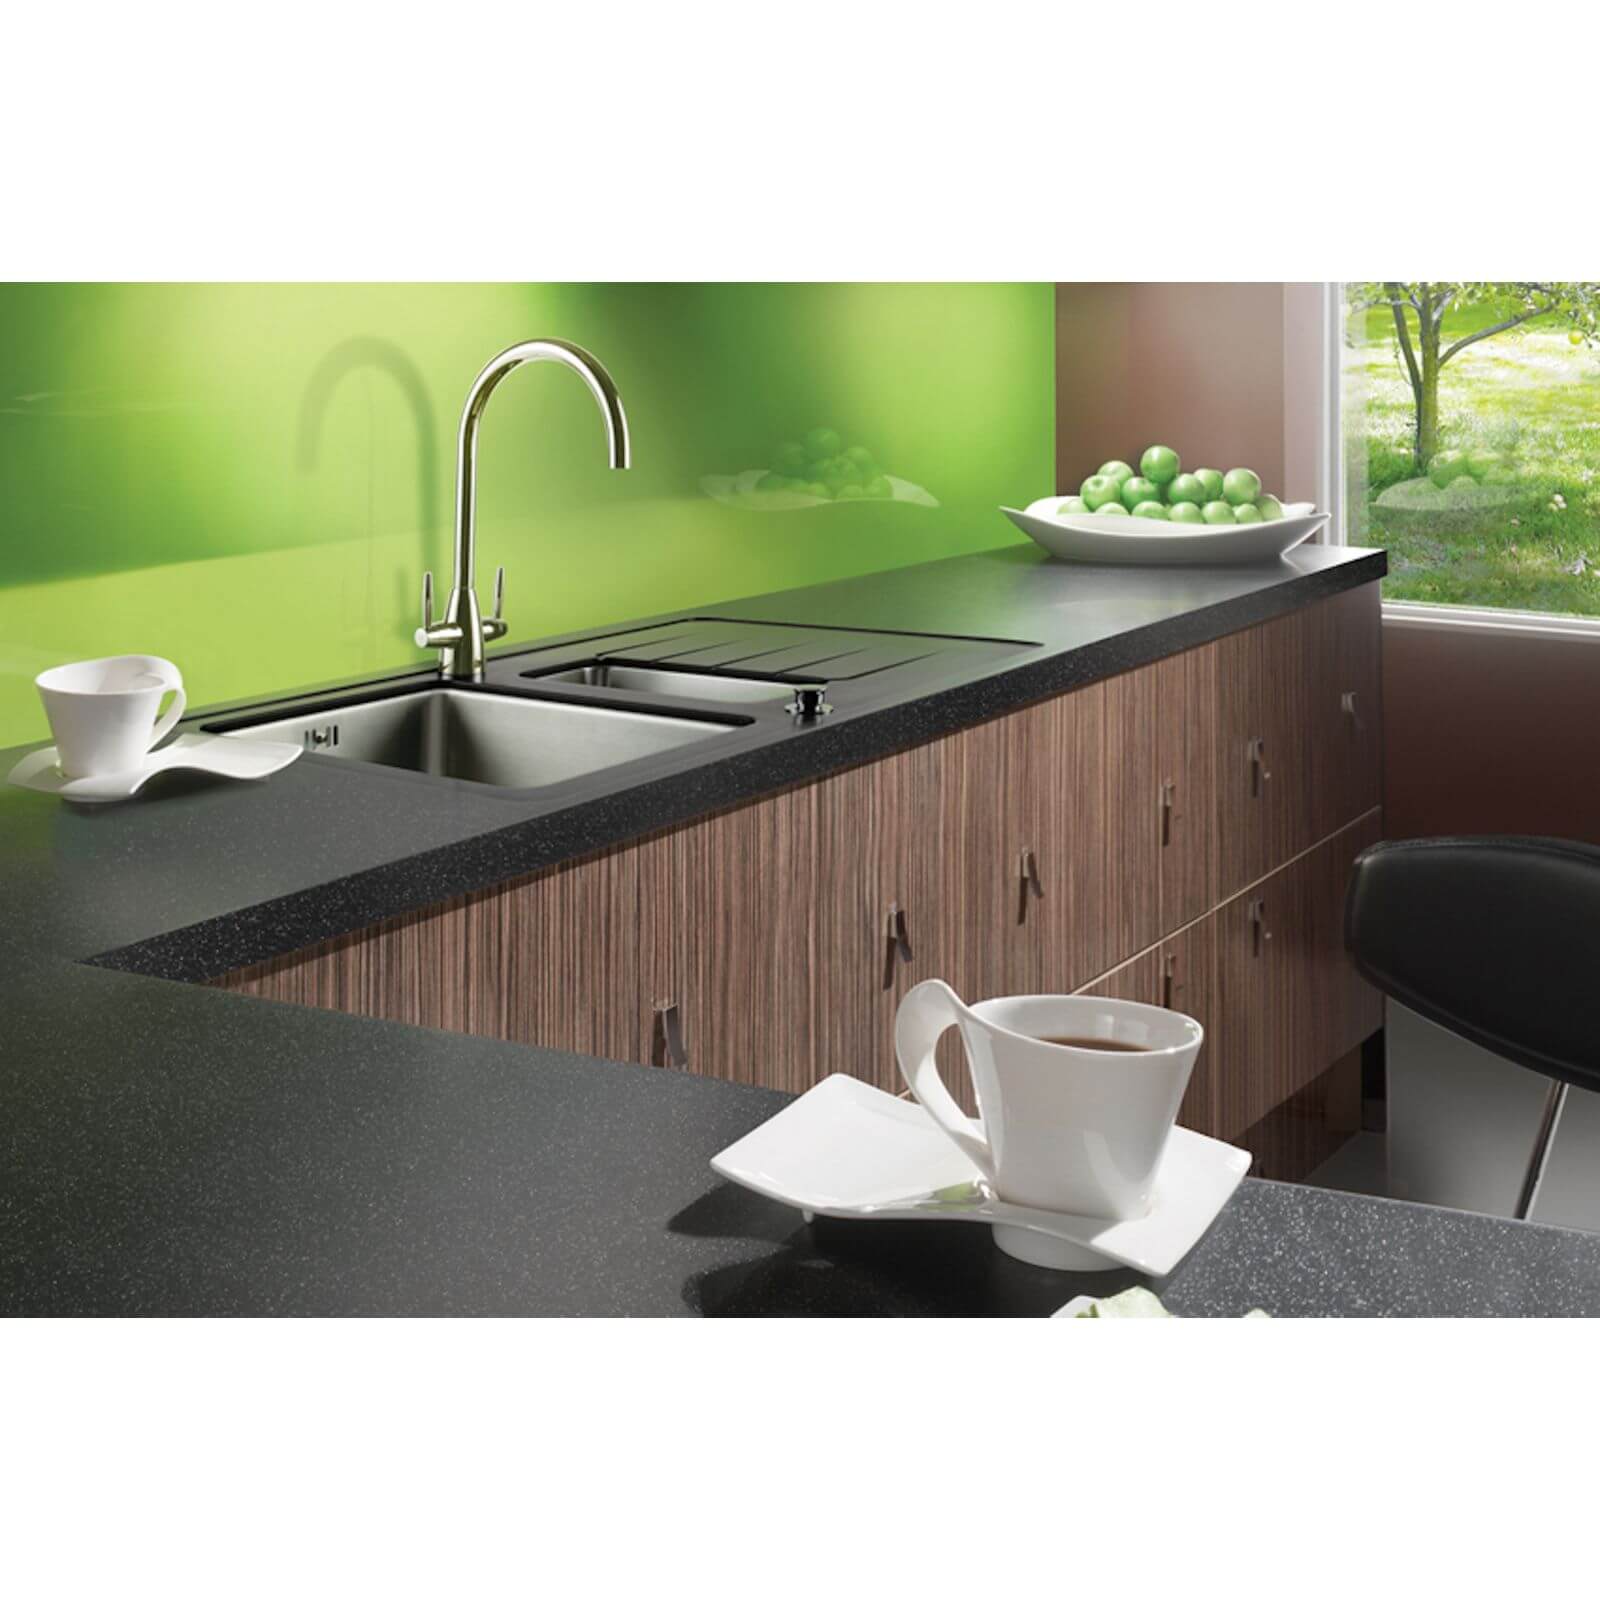 Maia Galaxy Kitchen Sink Worktop - Acrylic Super Large Right Hand Bowl - 3600 x 650 x 42mm